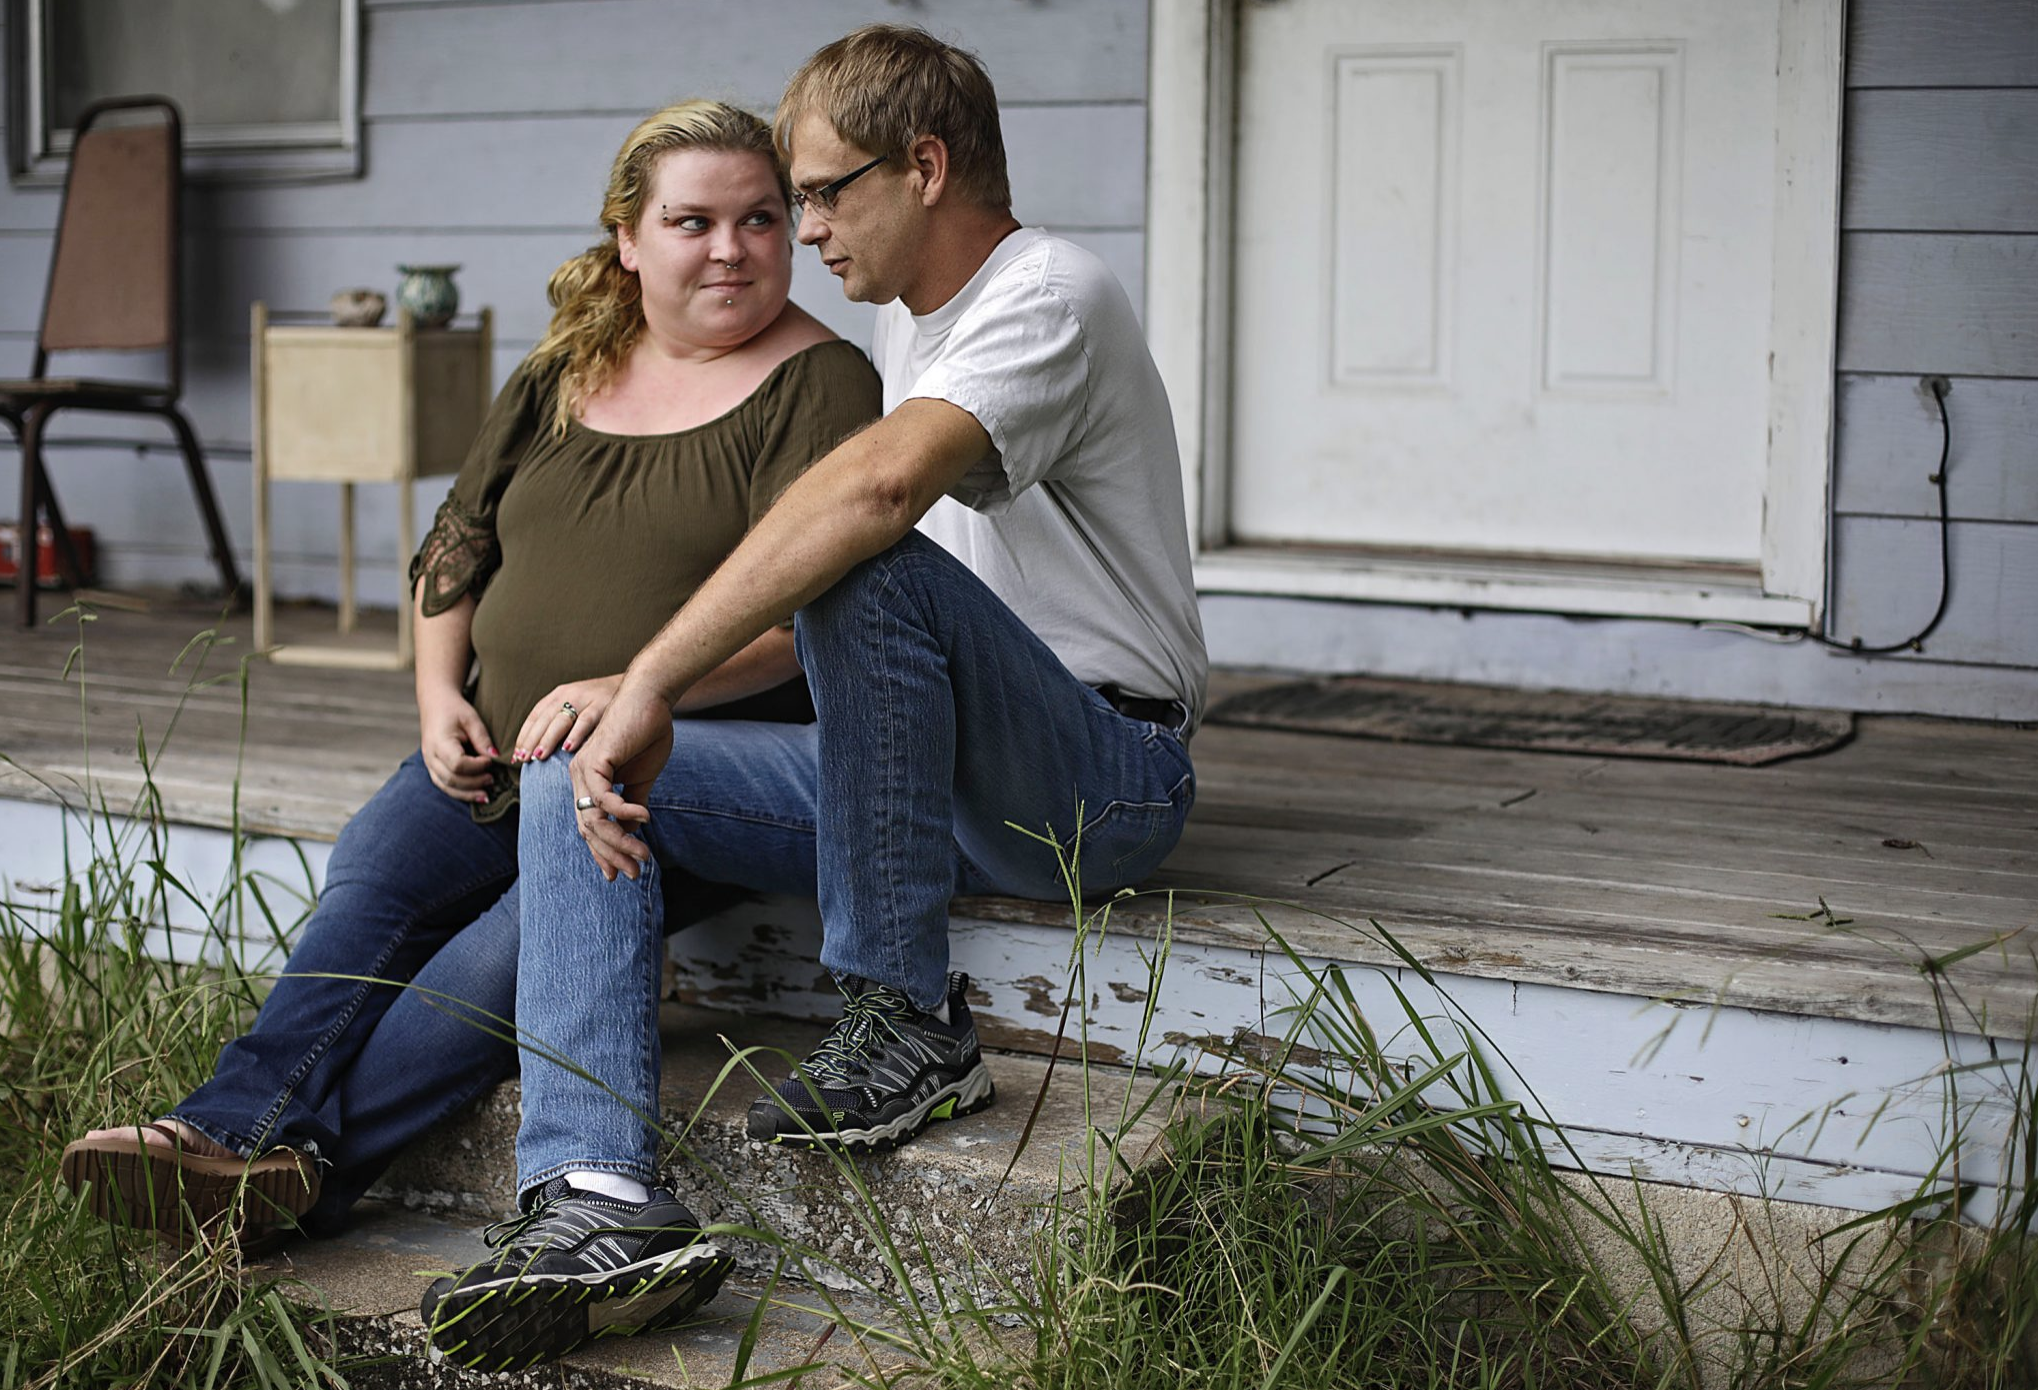 Tulsa’s Landlord Tenant Relief Program paid four months’ rent for Jack and Beth Myers of Tulsa County. Jack, a Type 2 diabetic, quit his job as a welder amid fear of contracting COVID-19. Beth said the program “took a lot of stress off " the couple. Image by Mike Simons. United States, 2020.